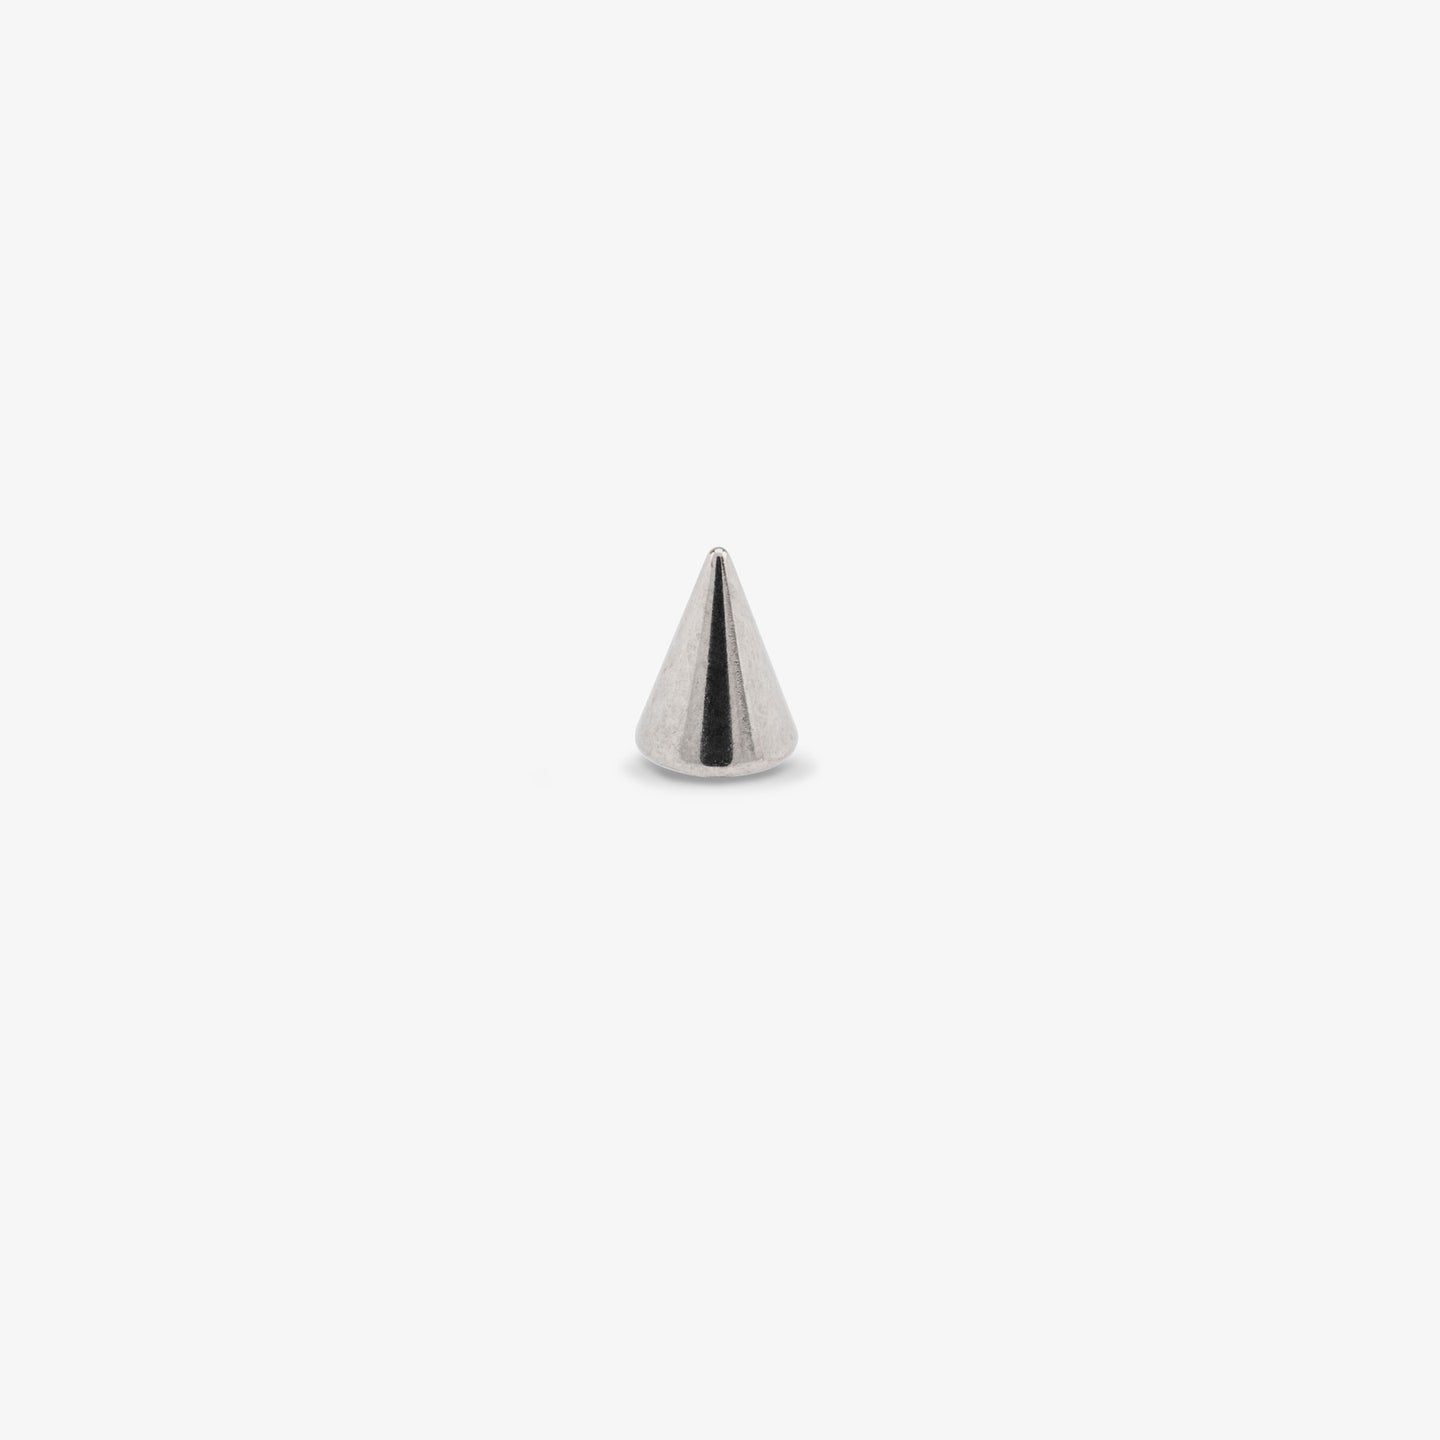 This is a small silver spike stud color:null|silver